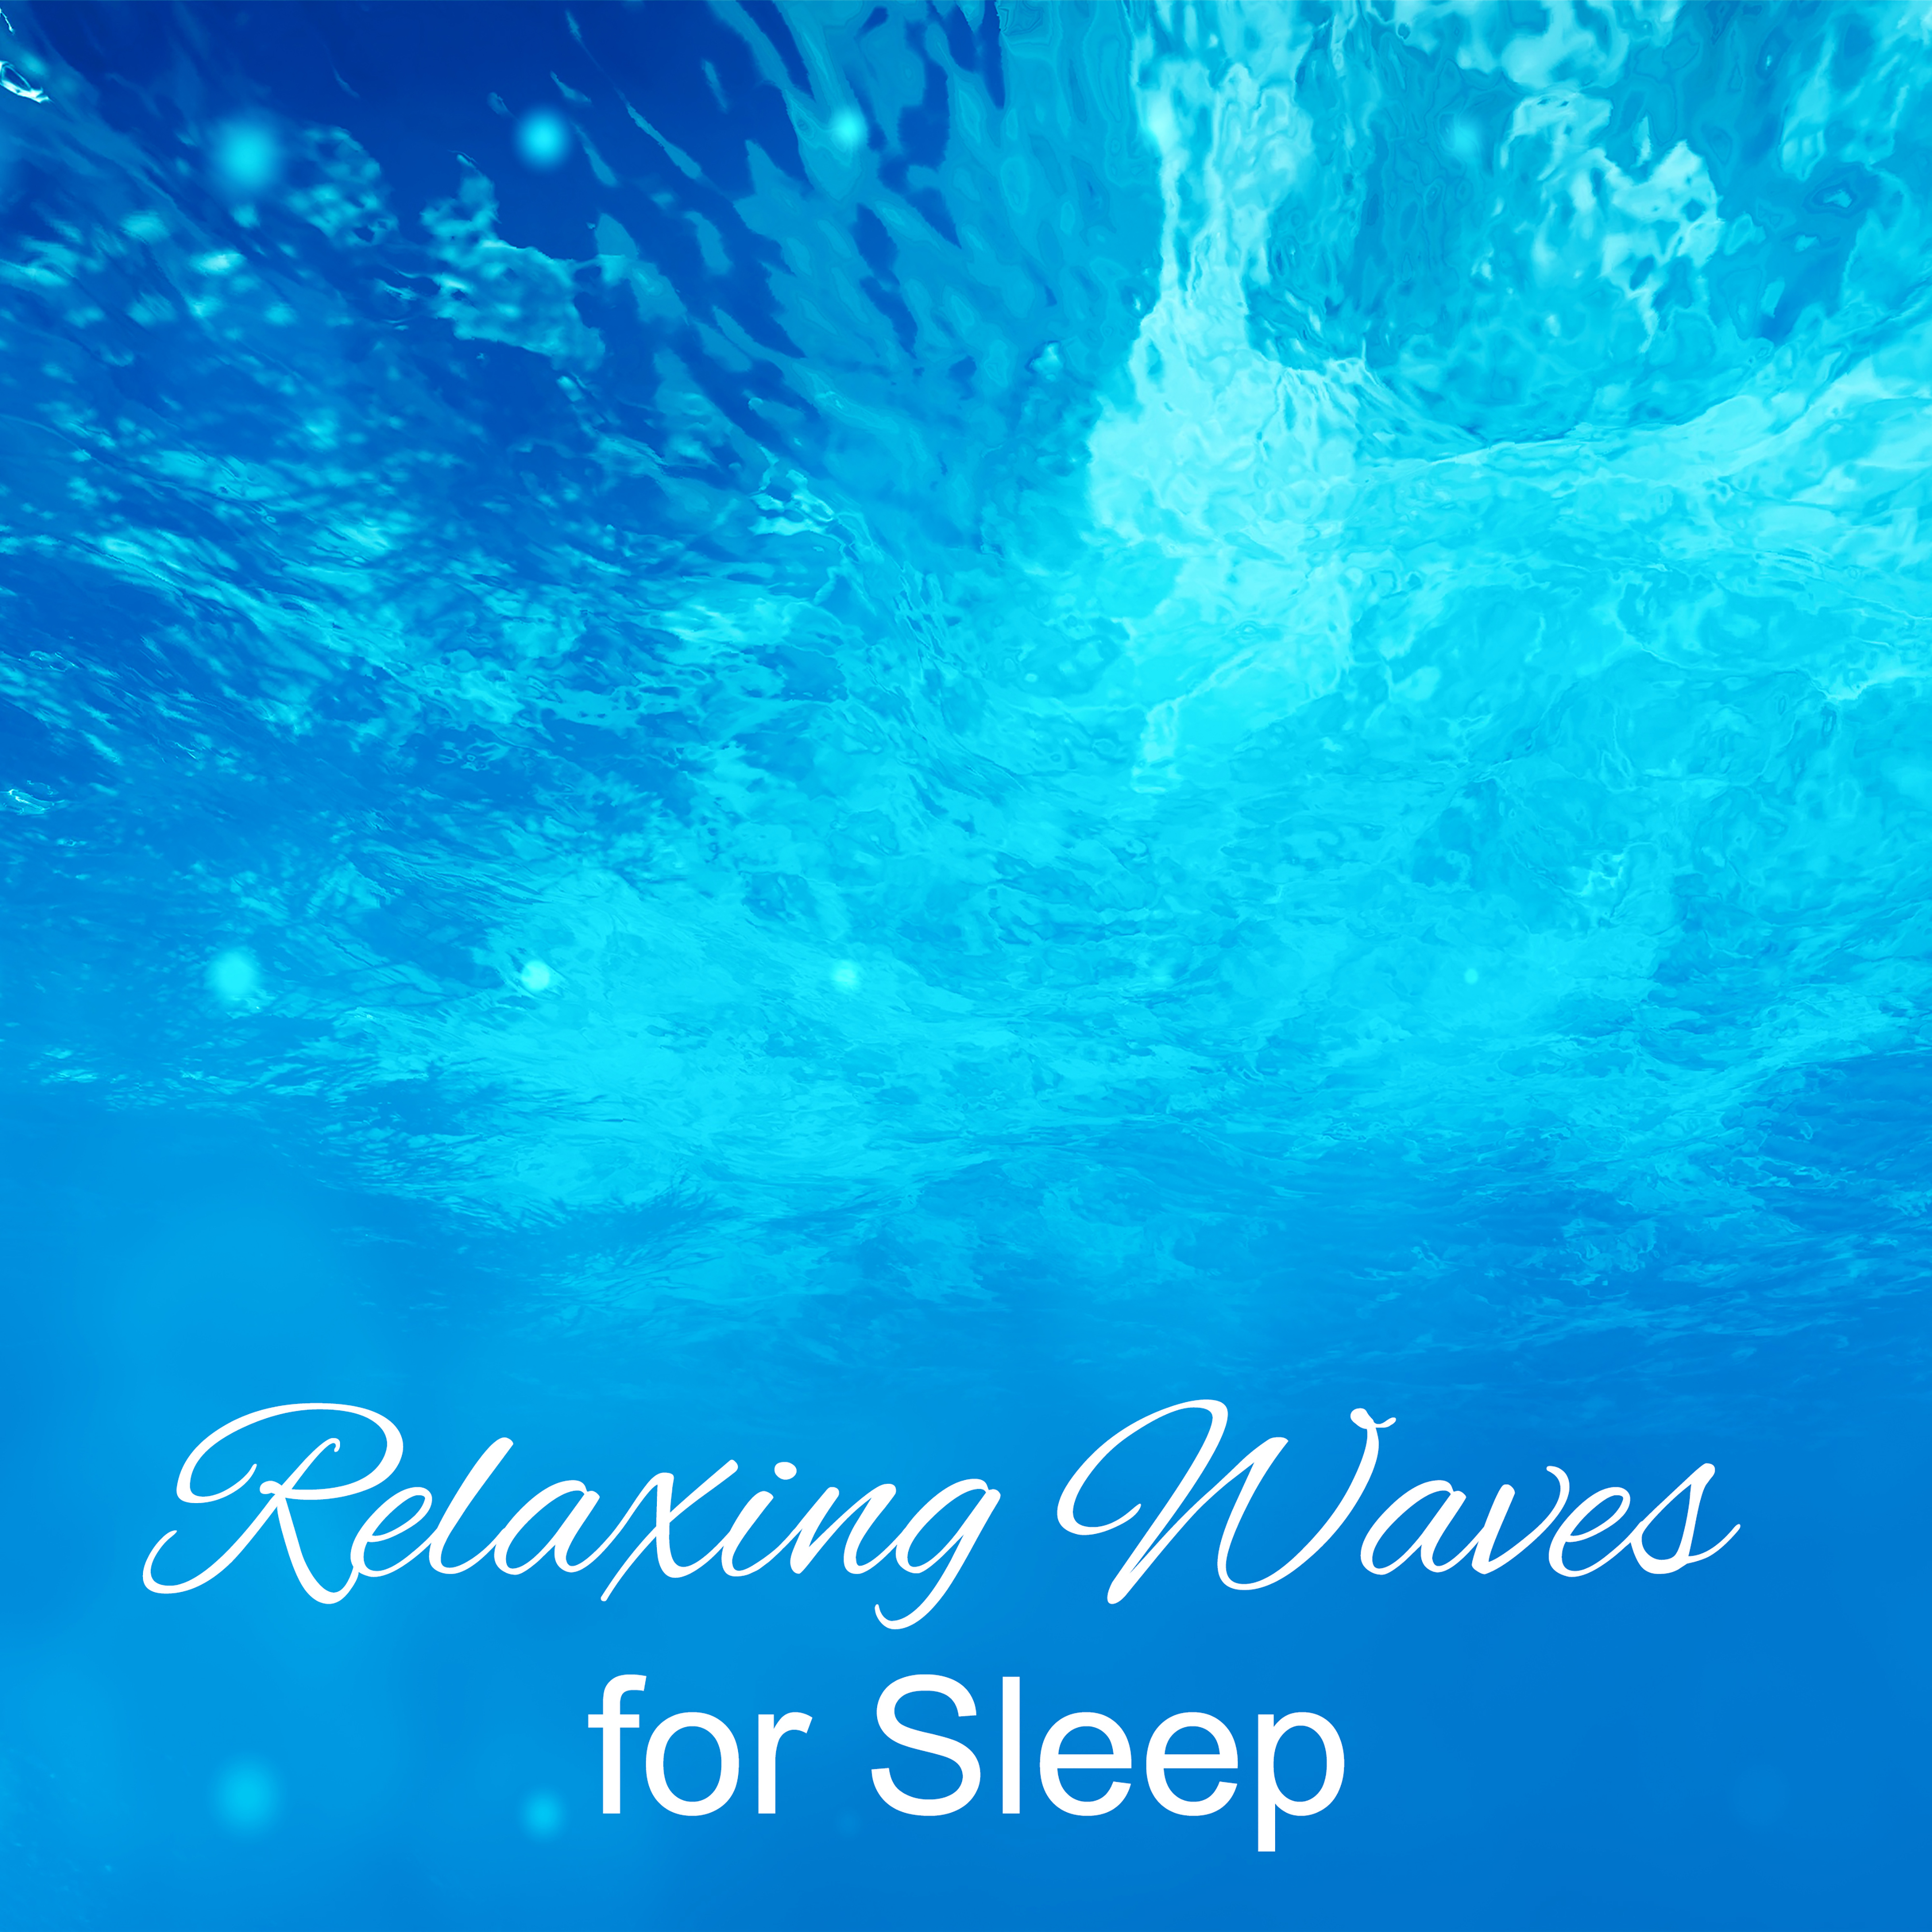 Relaxing Waves for Sleep – Peaceful Music, Deep Sleep, Tranquility & Harmony, Nature Sounds for Relaxation, Soothing Waves